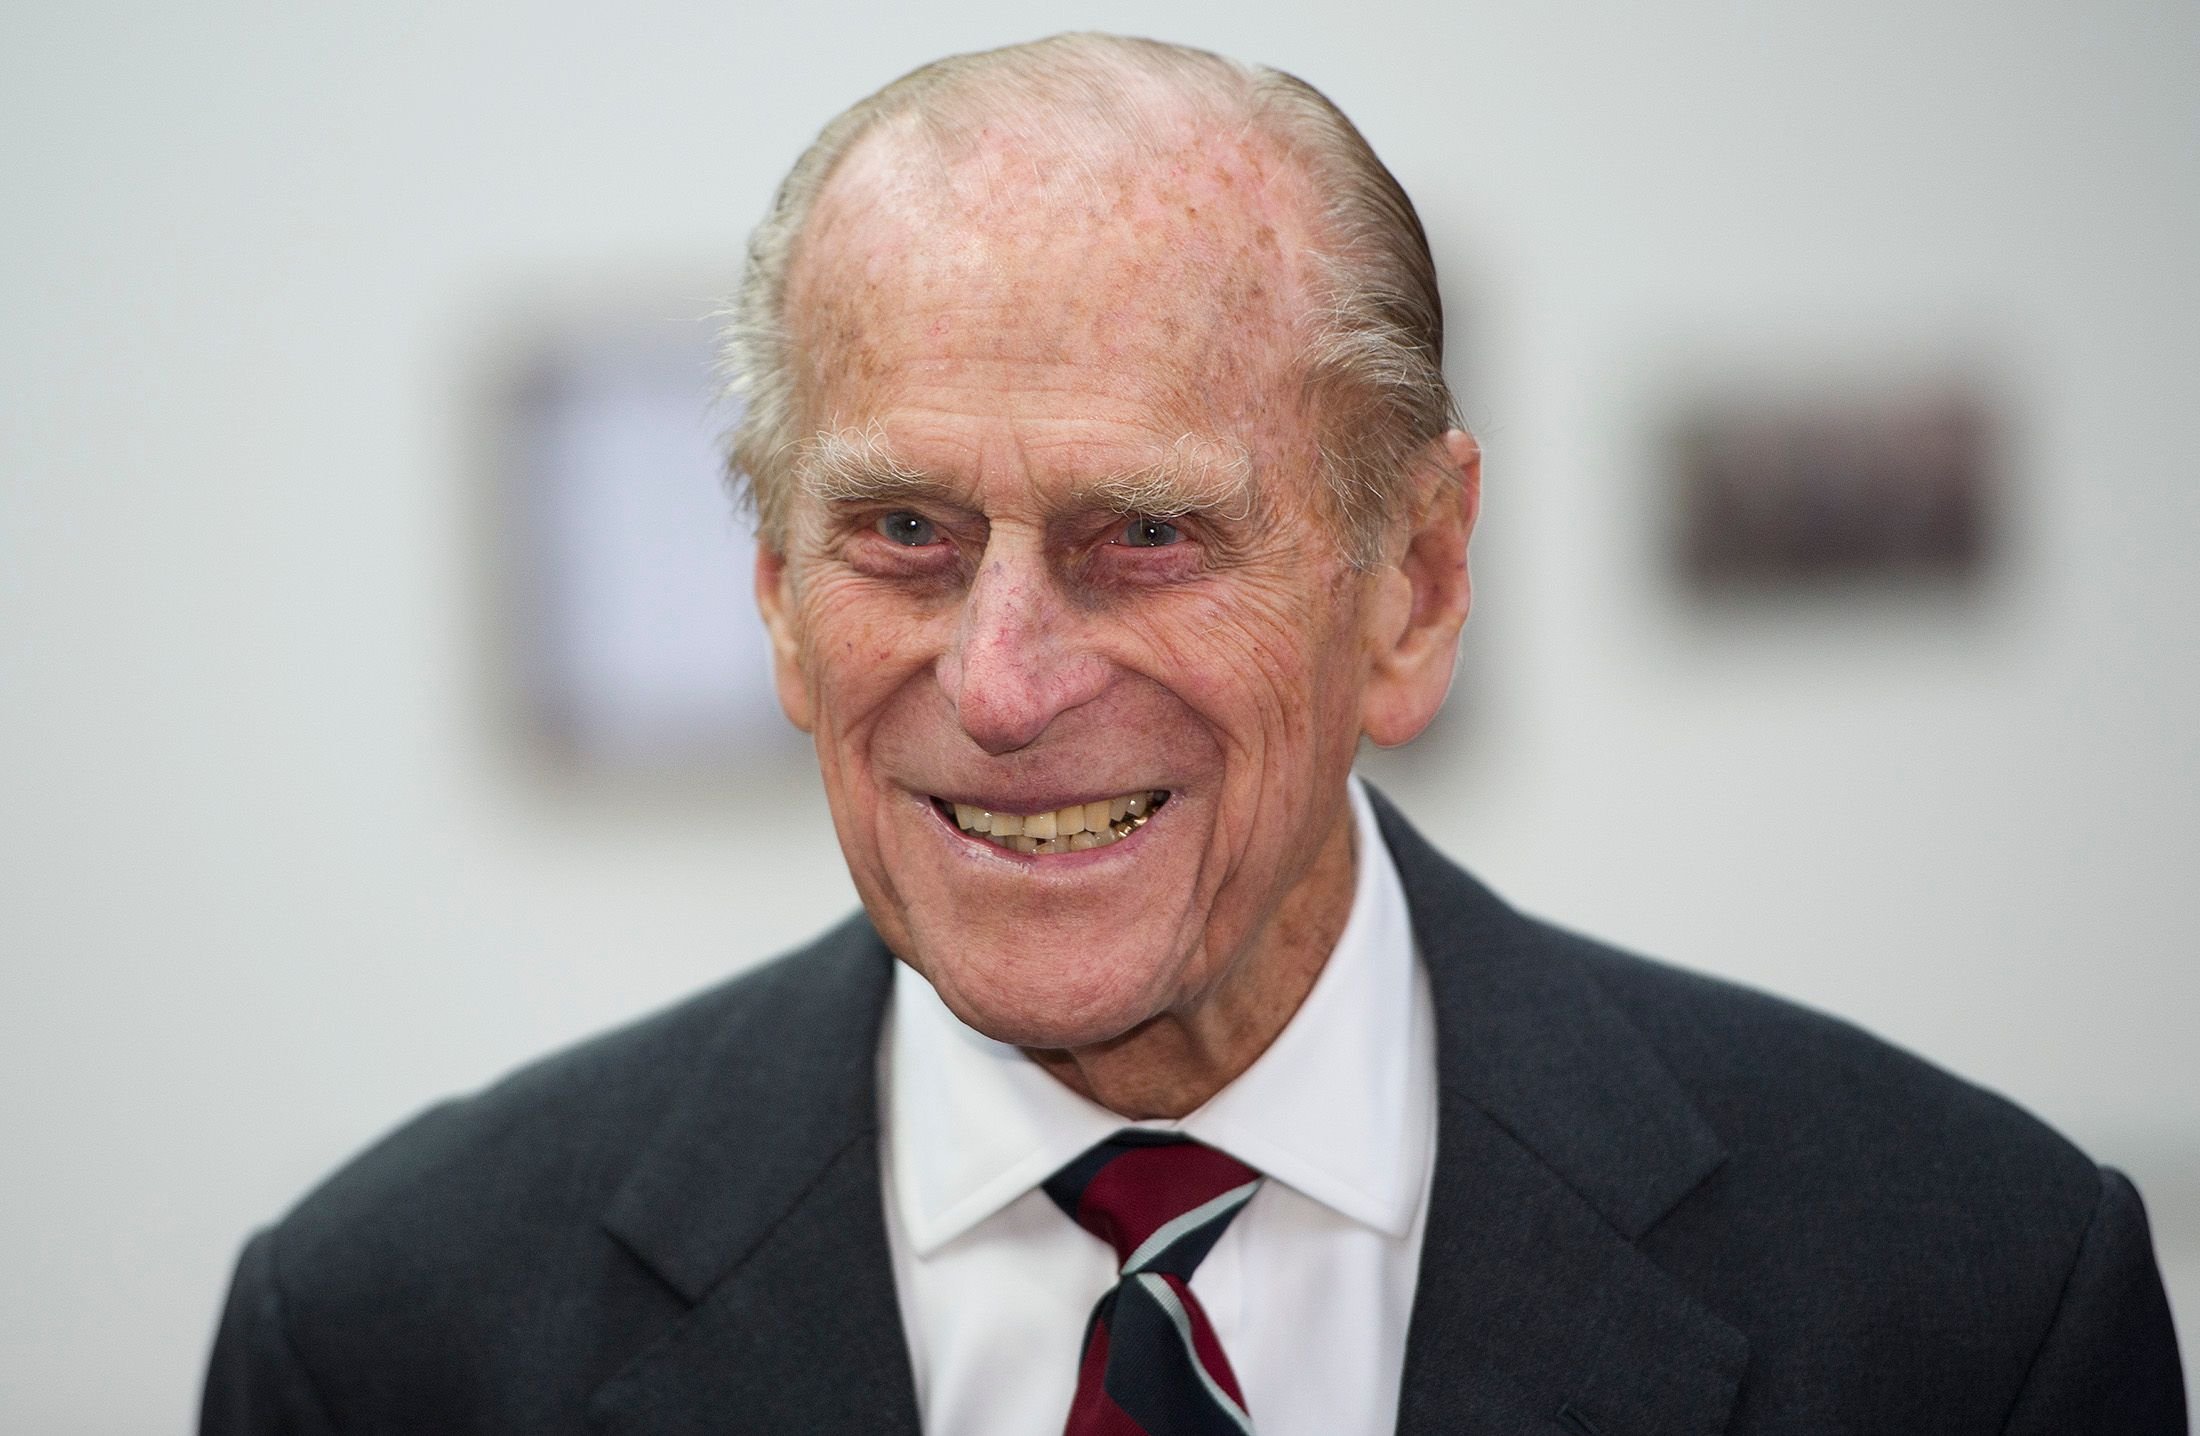 The Duke Of Edinburgh at the opening of the 'First World War In The Air' exhibition at the RAF museum in Hendon on December 02, 2014 | Photo: Getty Images